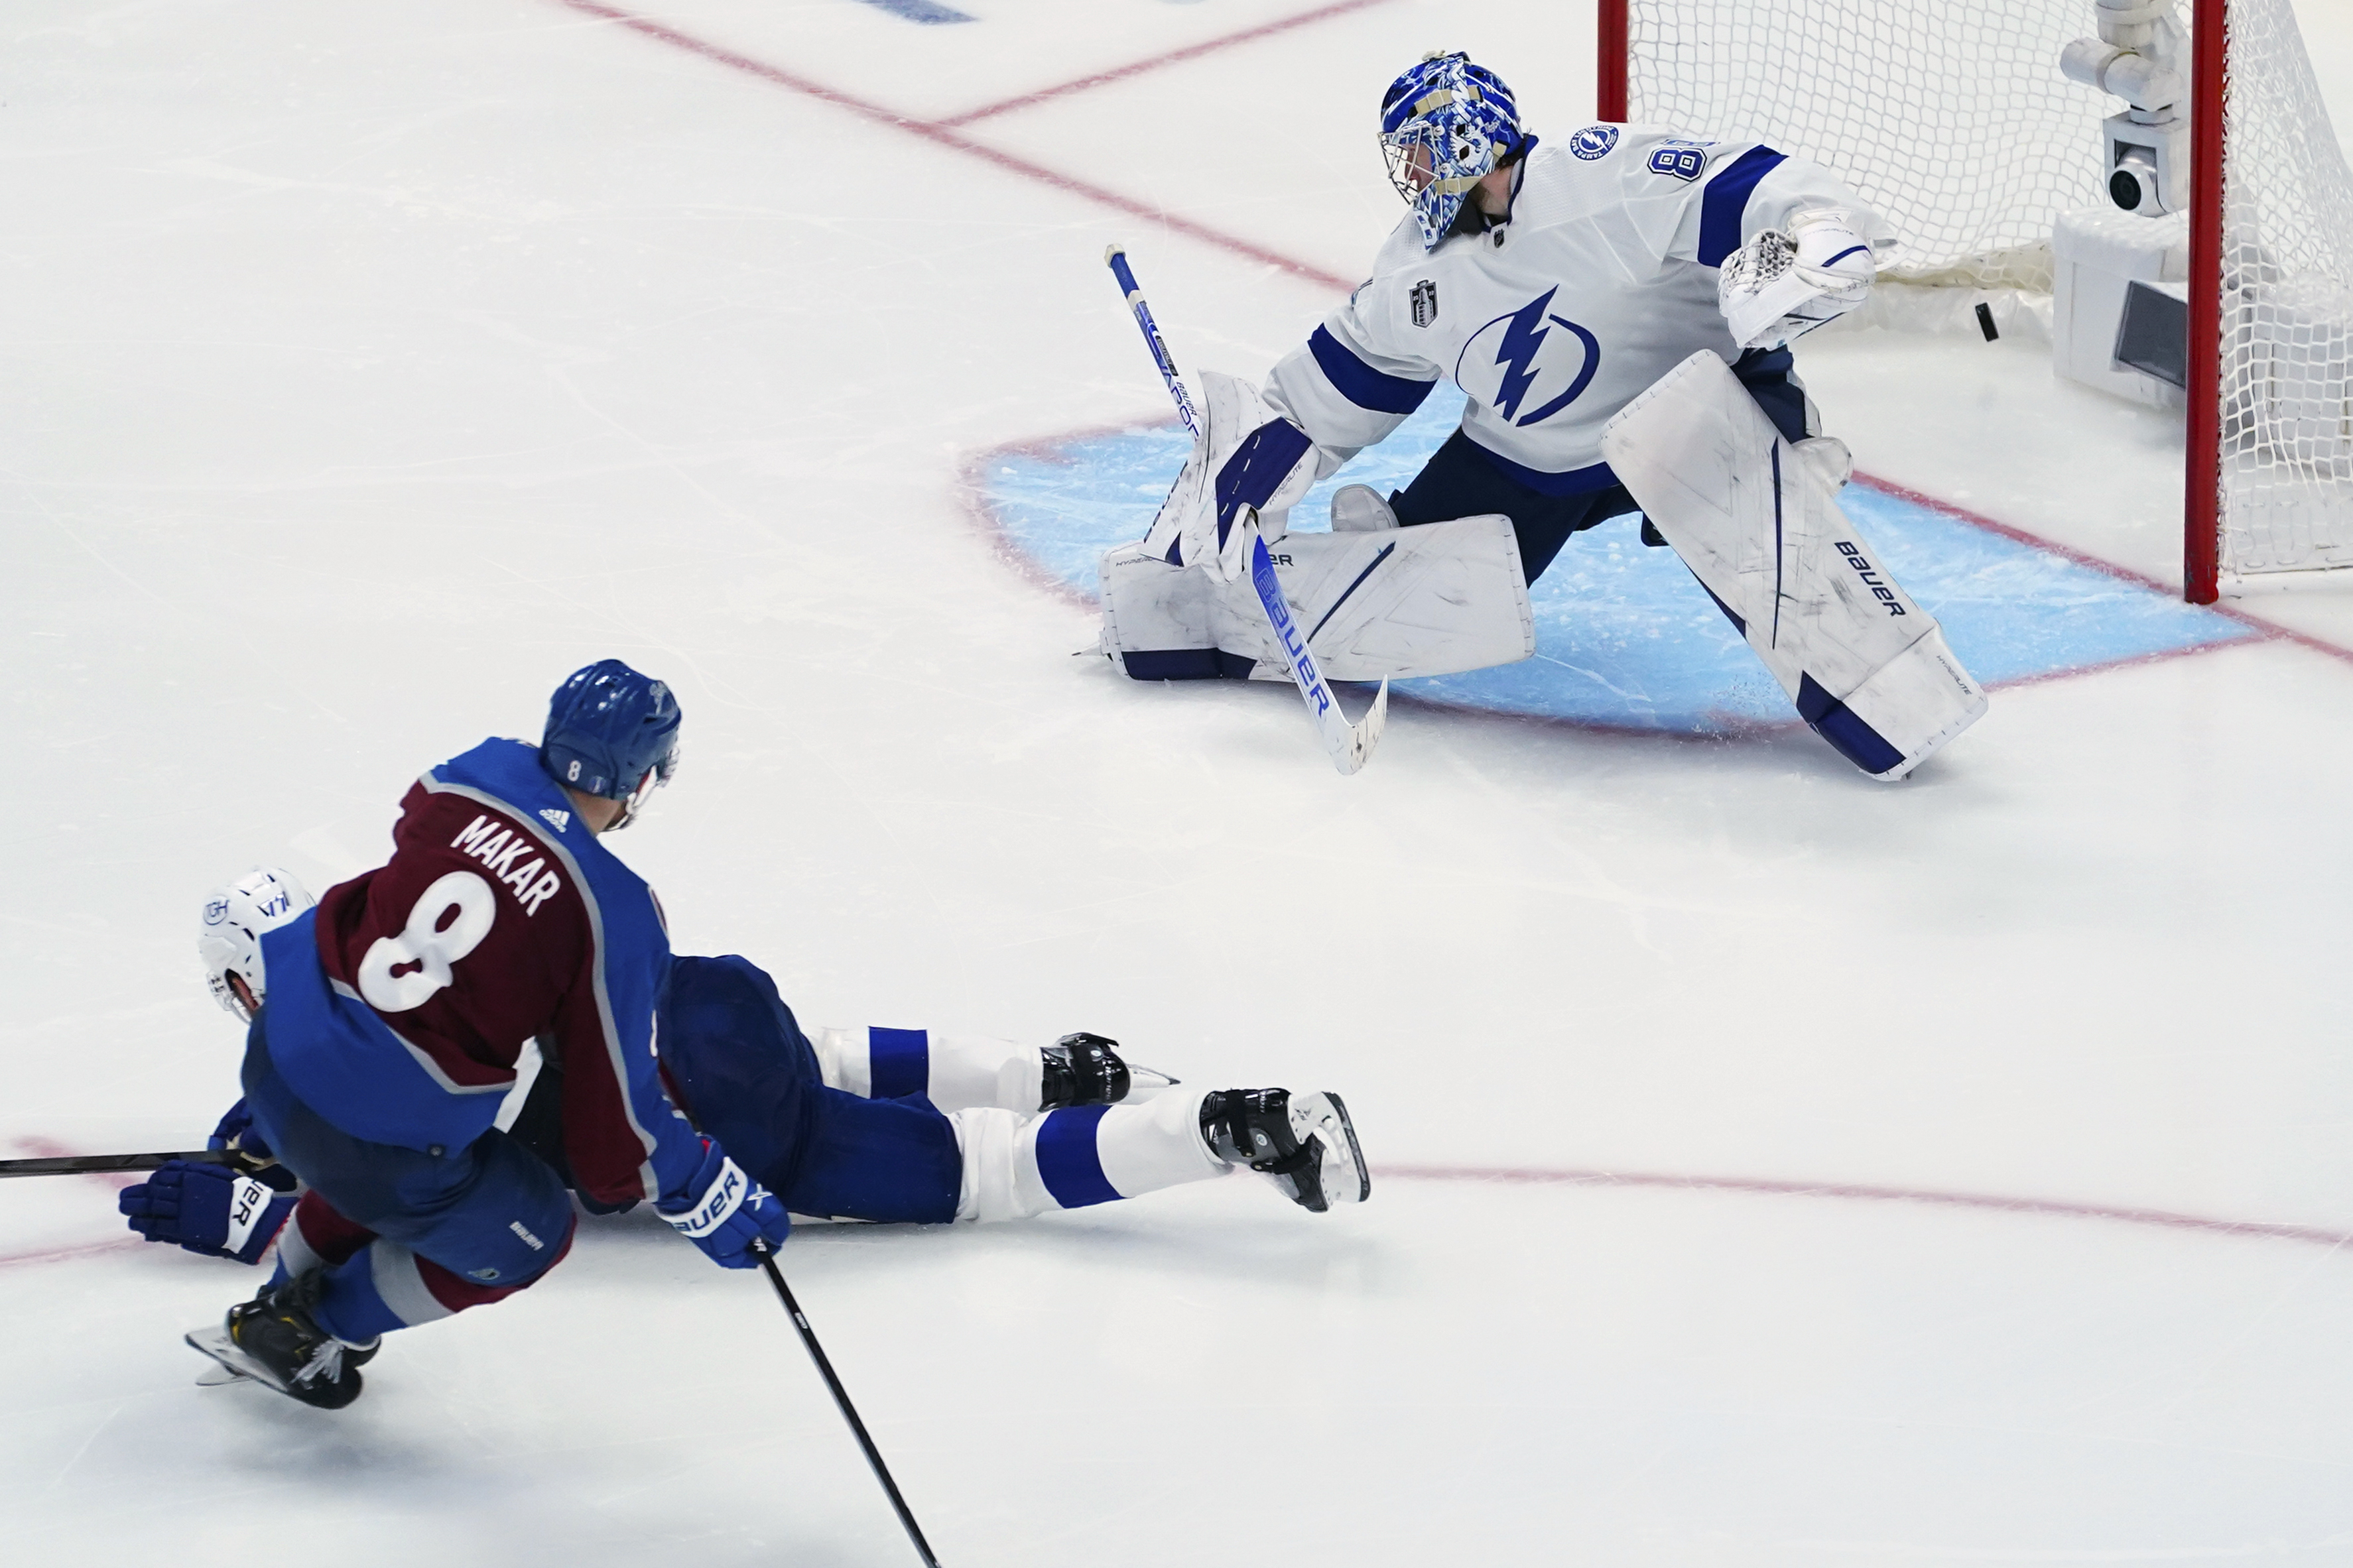 How to watch Game 3 of the Stanley Cup Finals Stream Colorado Avalanche vs Tampa Bay Lightning online for free